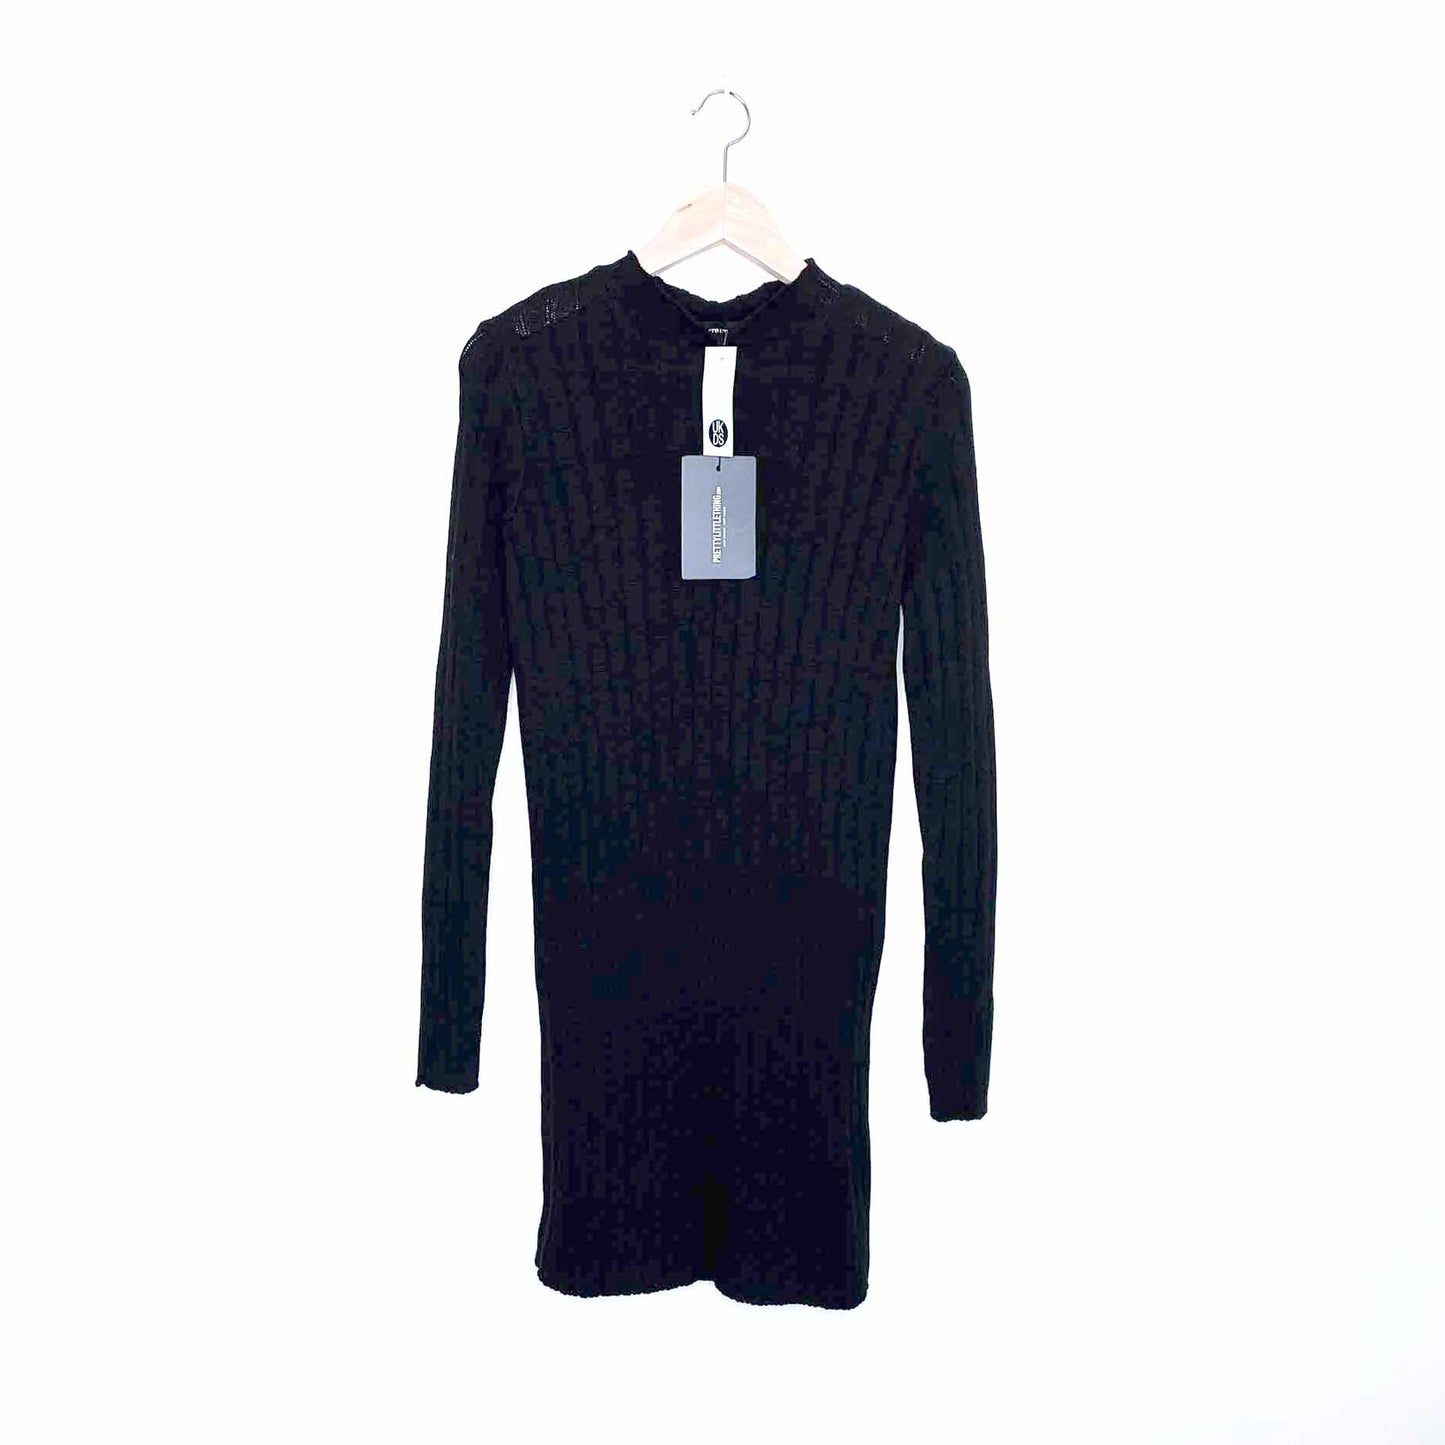 nwt pretty little thing ribbed sweater dress - size small